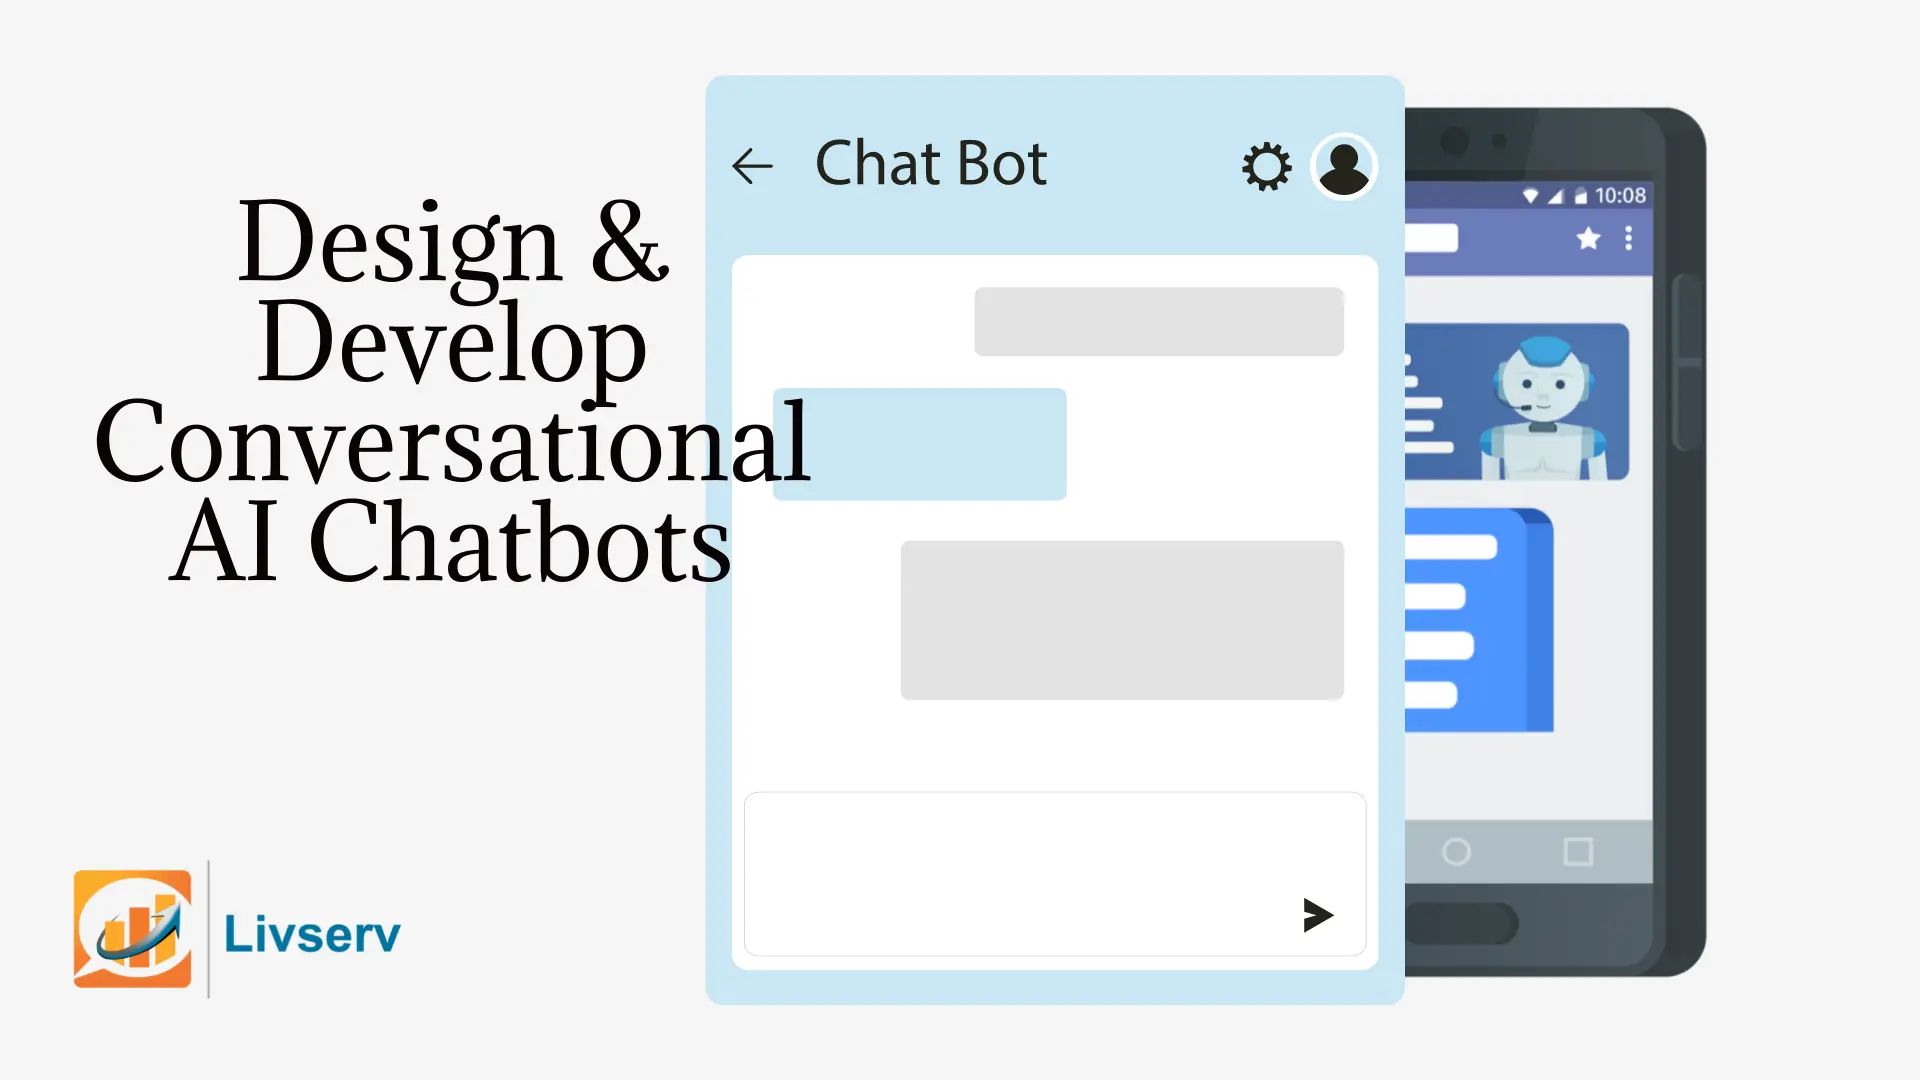 Best Practices for Designing and Developing Effective Chatbots